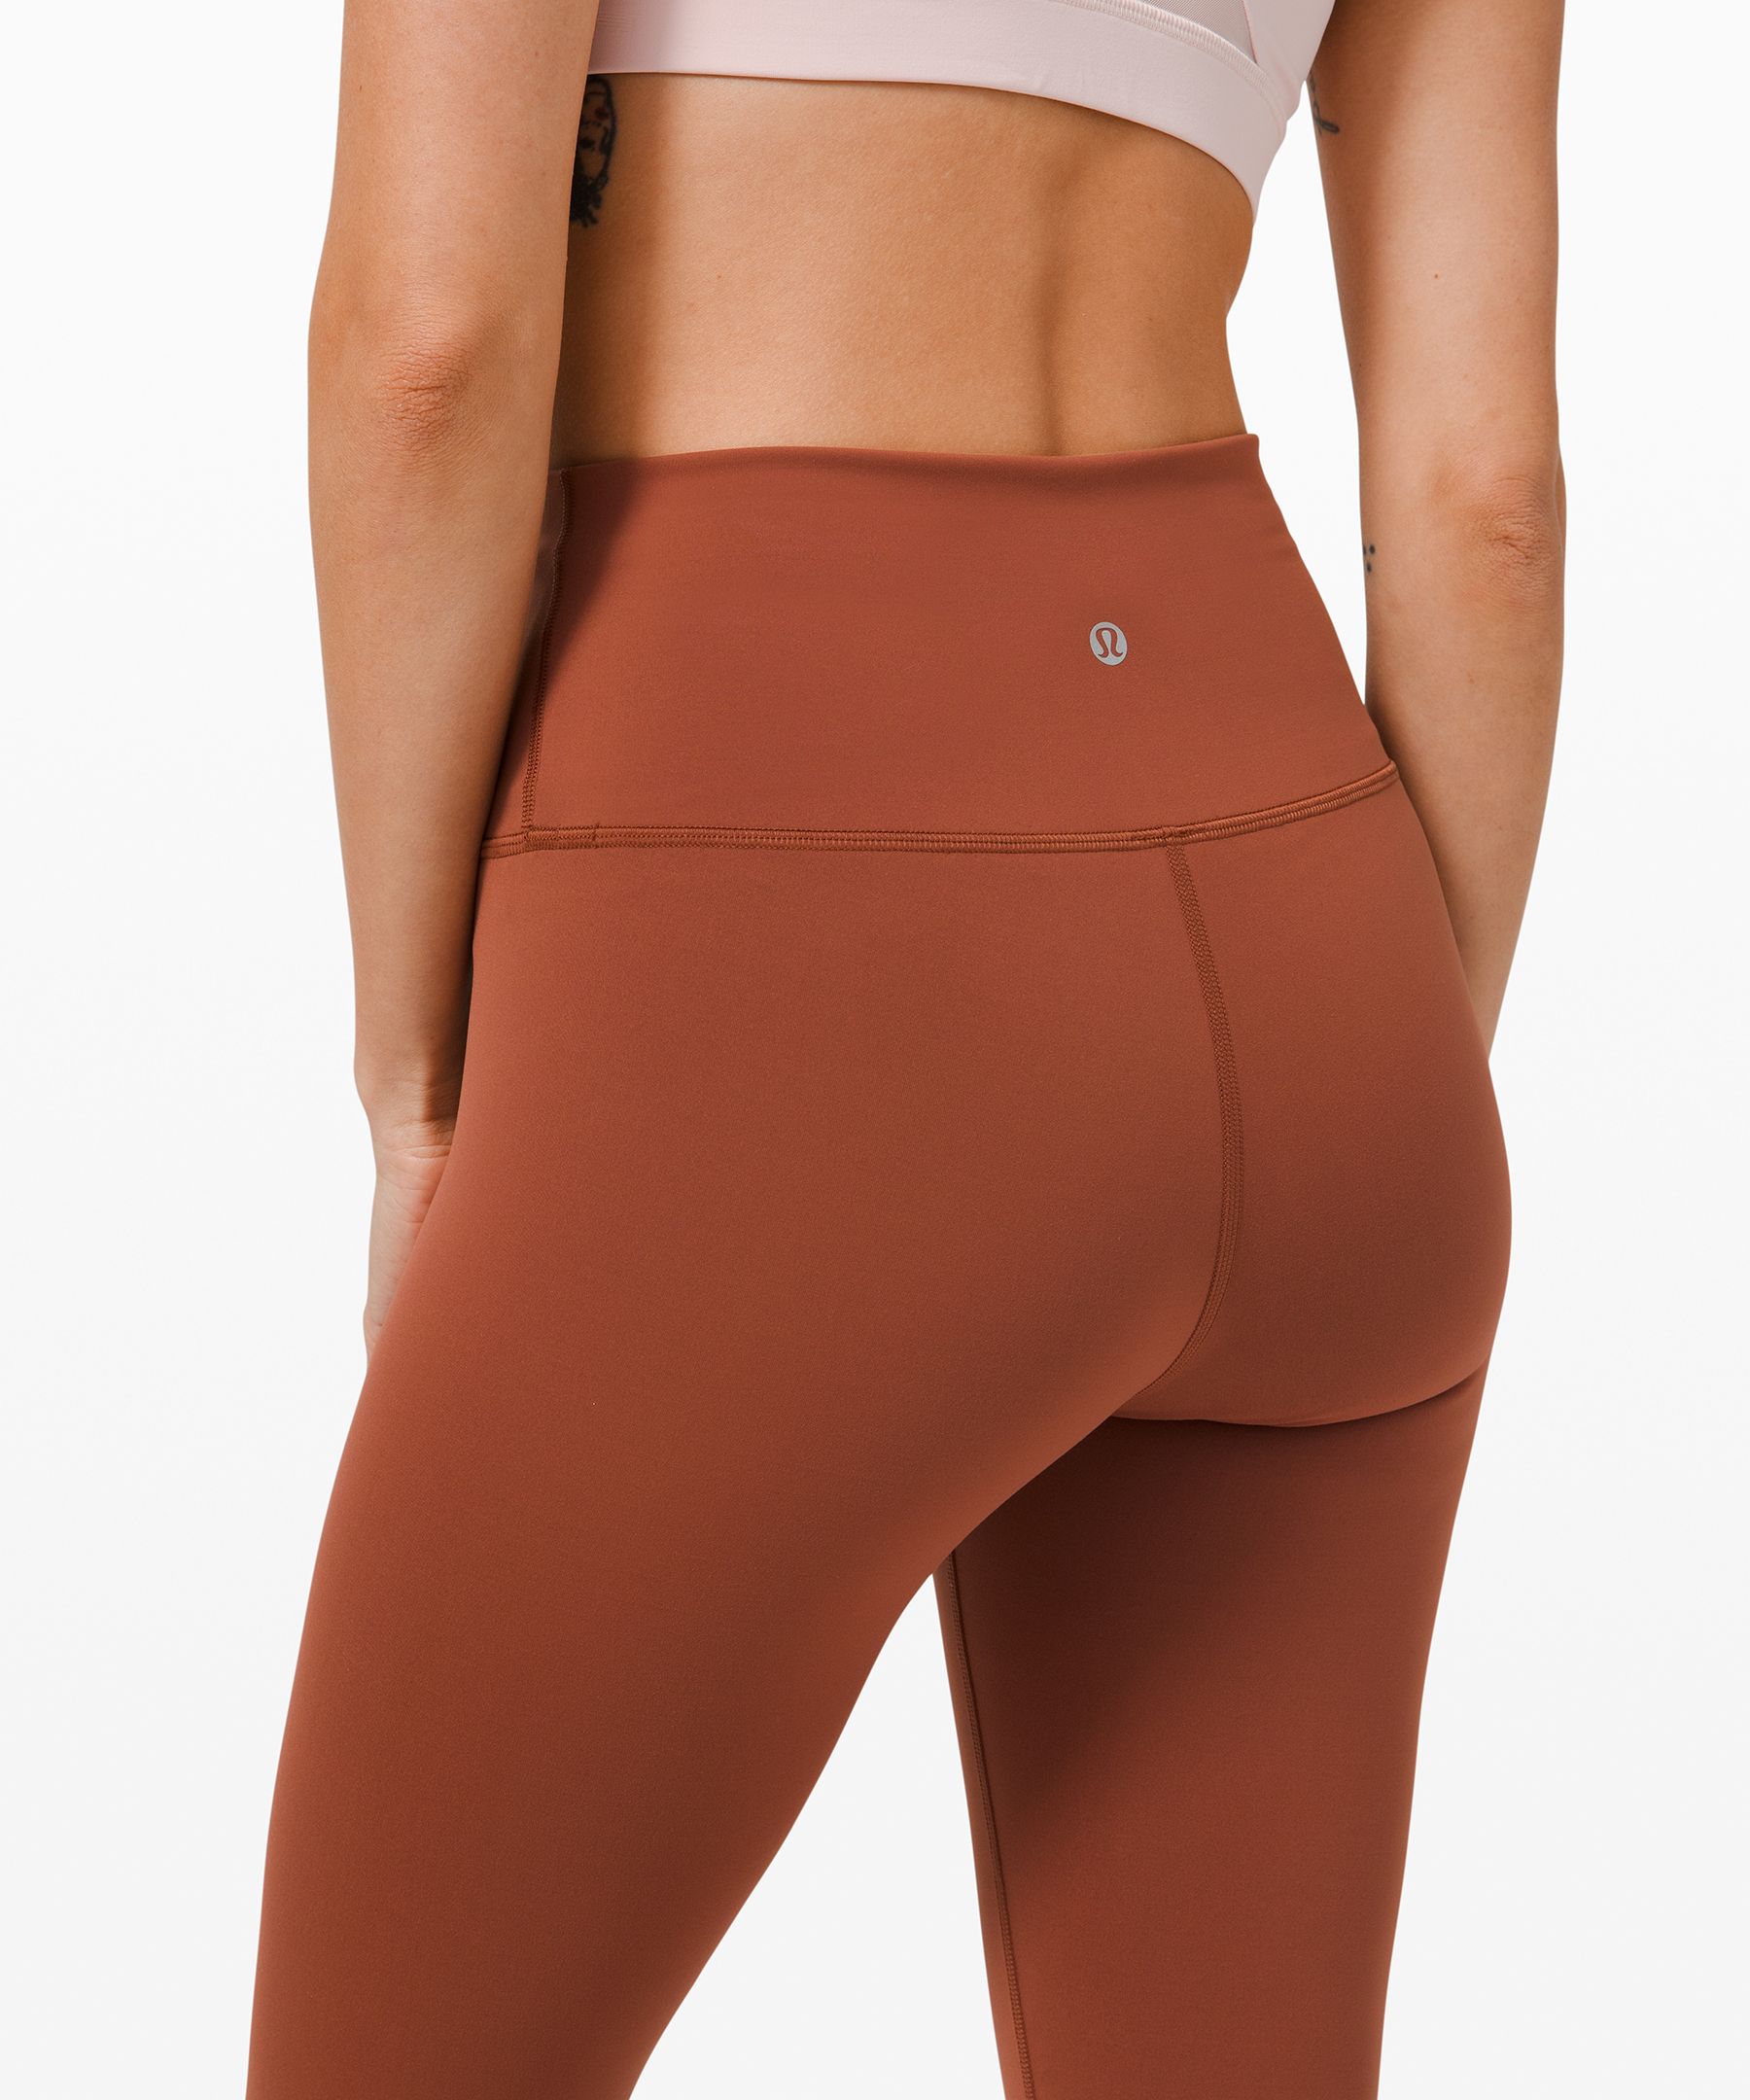 The force within new tight. A good fit in the everlux material? :  r/lululemon